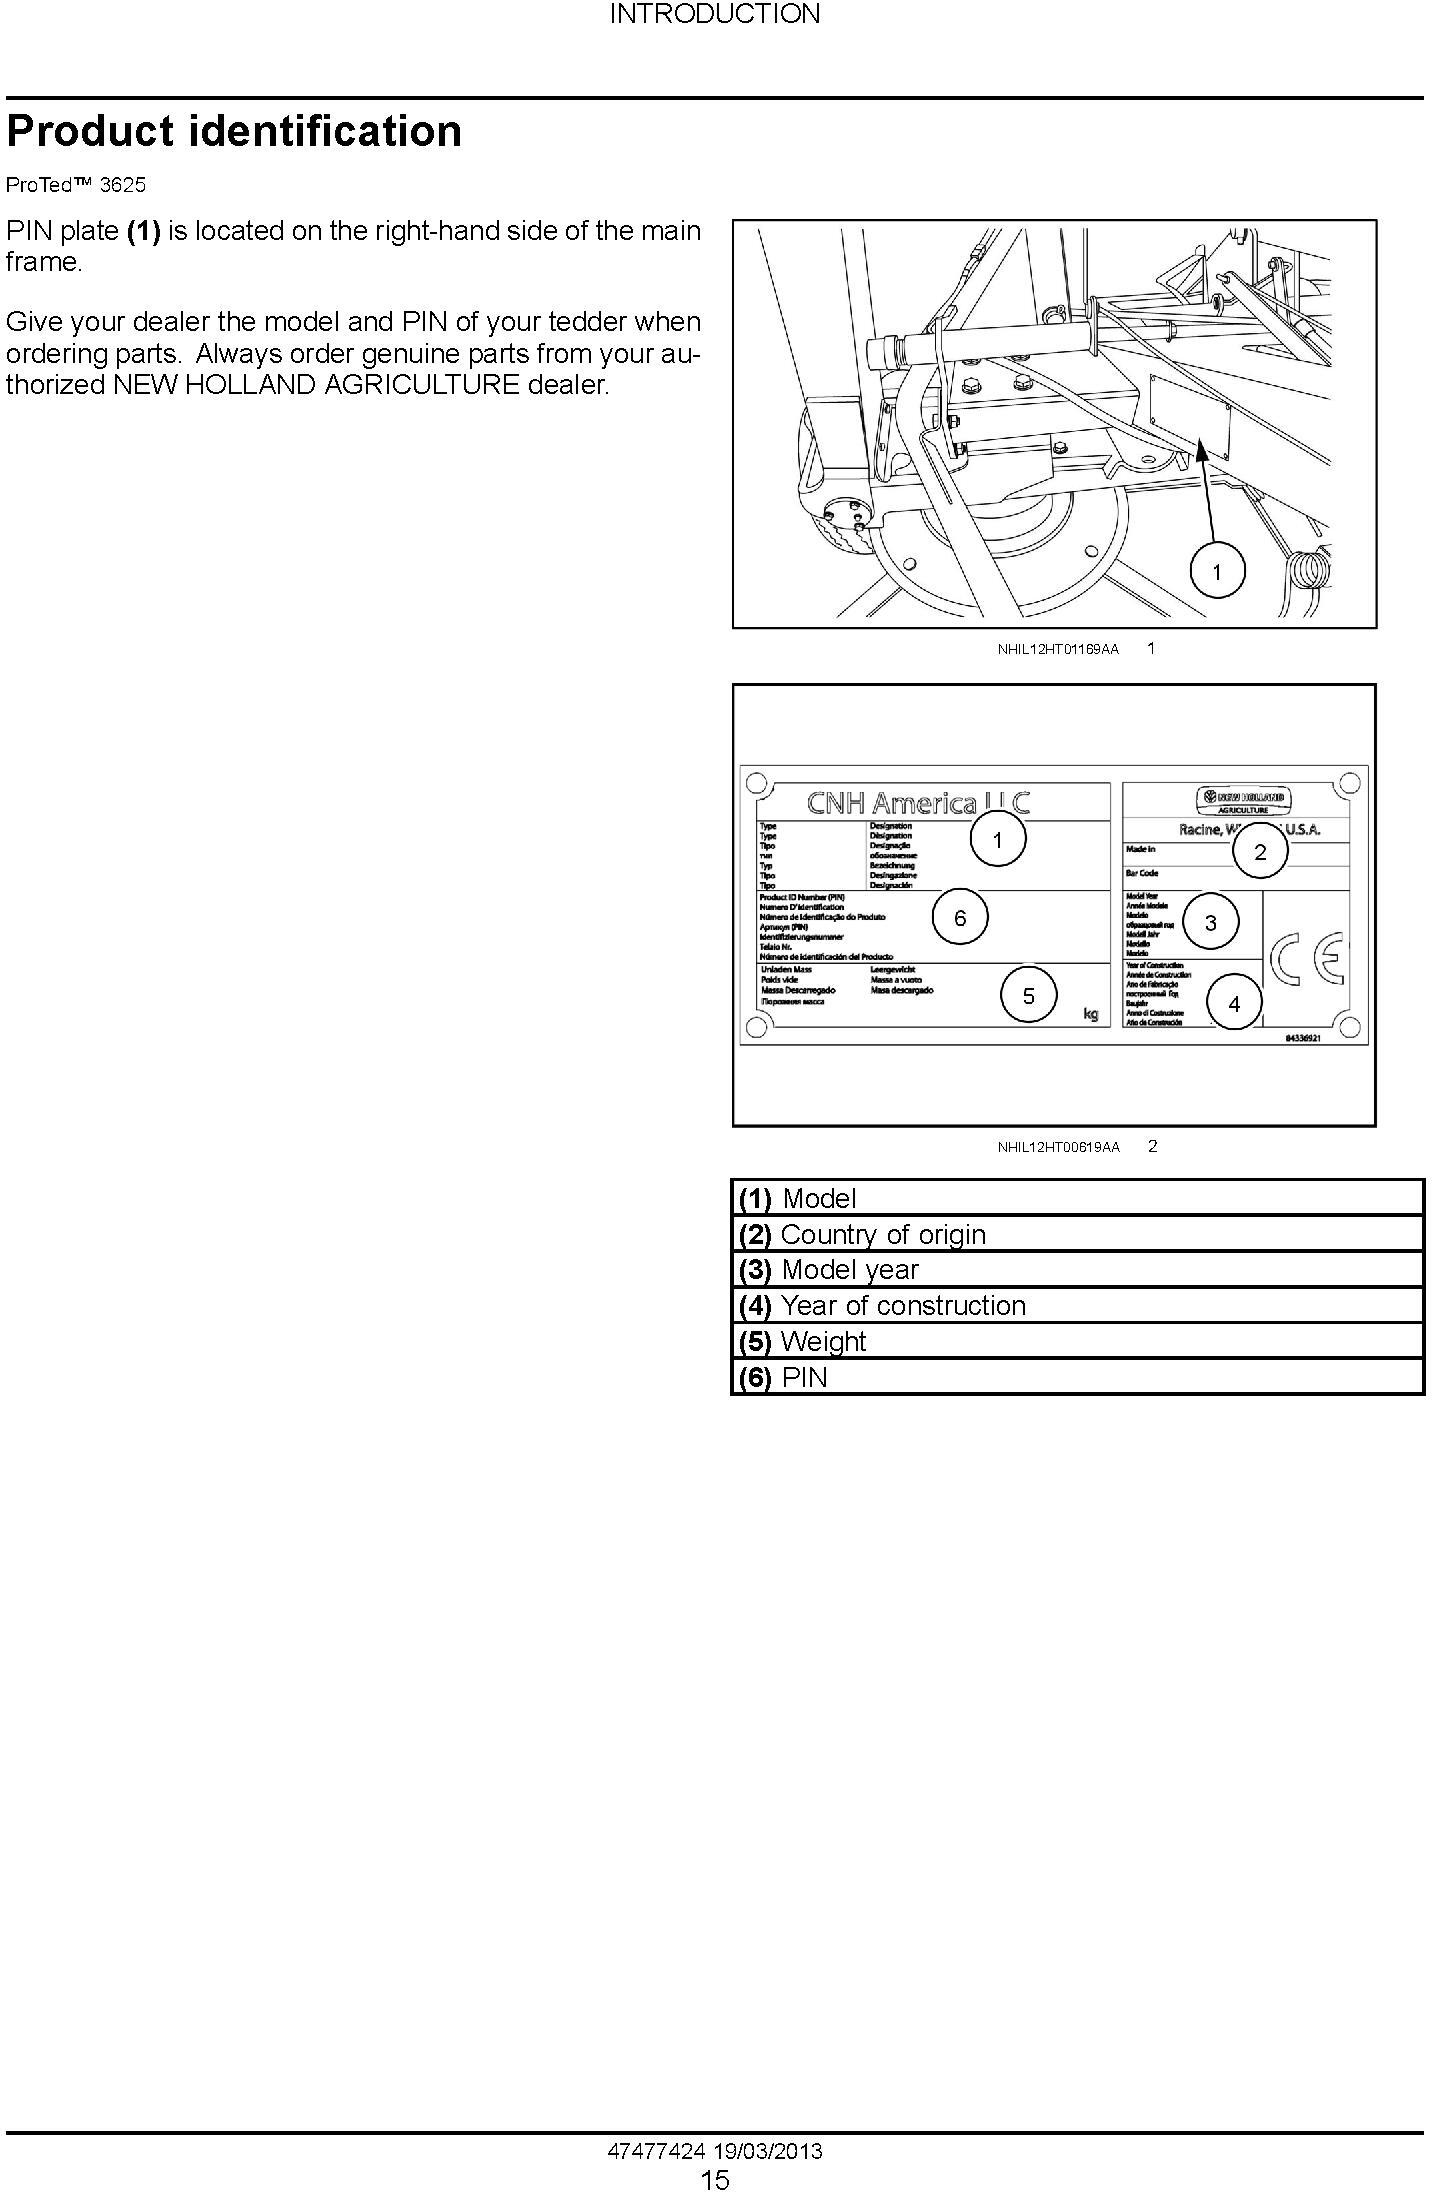 New Holland ProTed 3417, 3625, 3836 Rotary Tedder Service Manual - 1